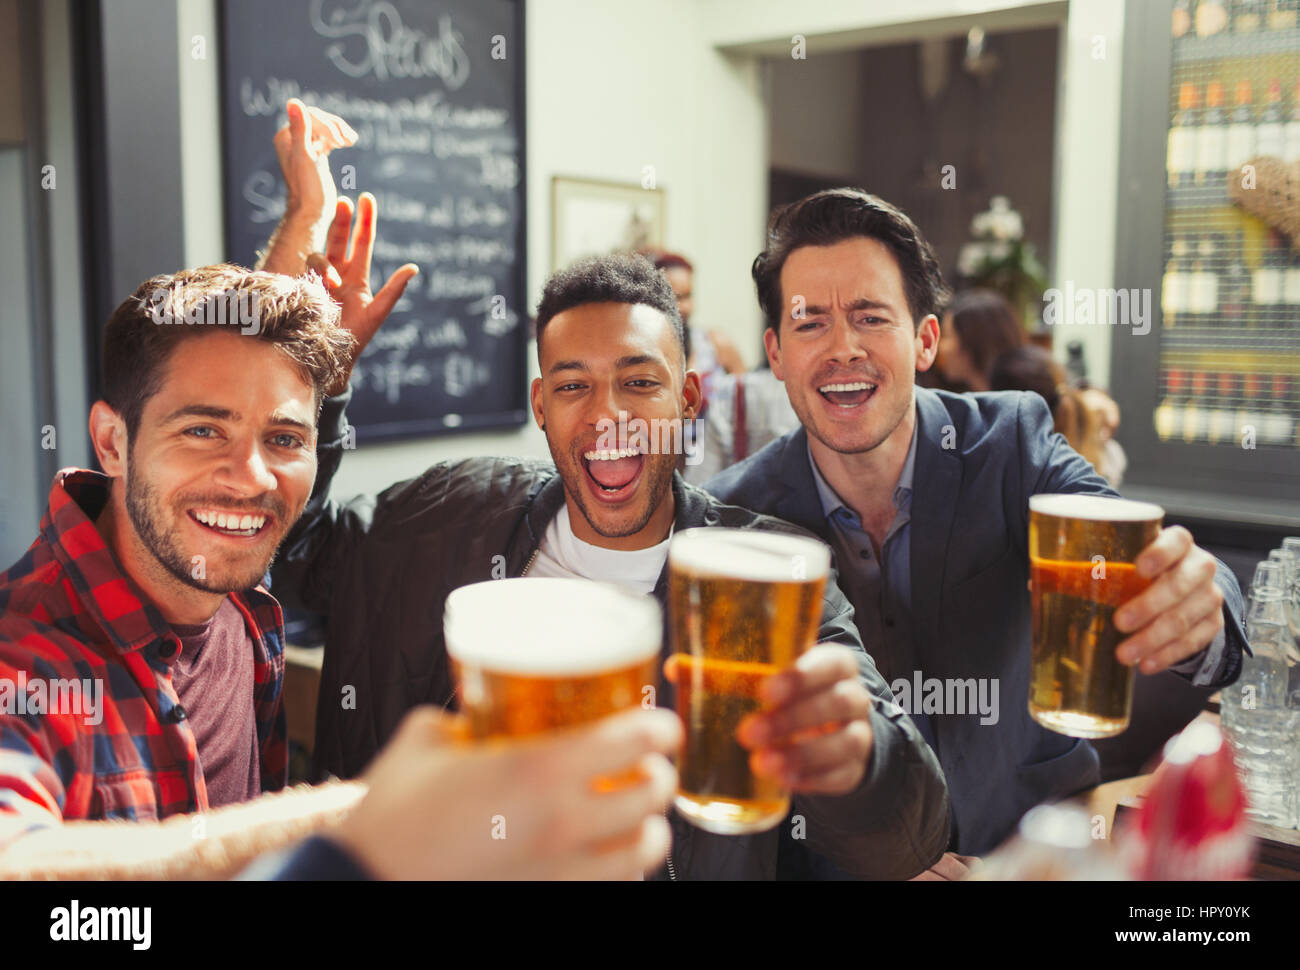 Portrait enthusiastic men friends toasting beer glasses at bar Stock Photo